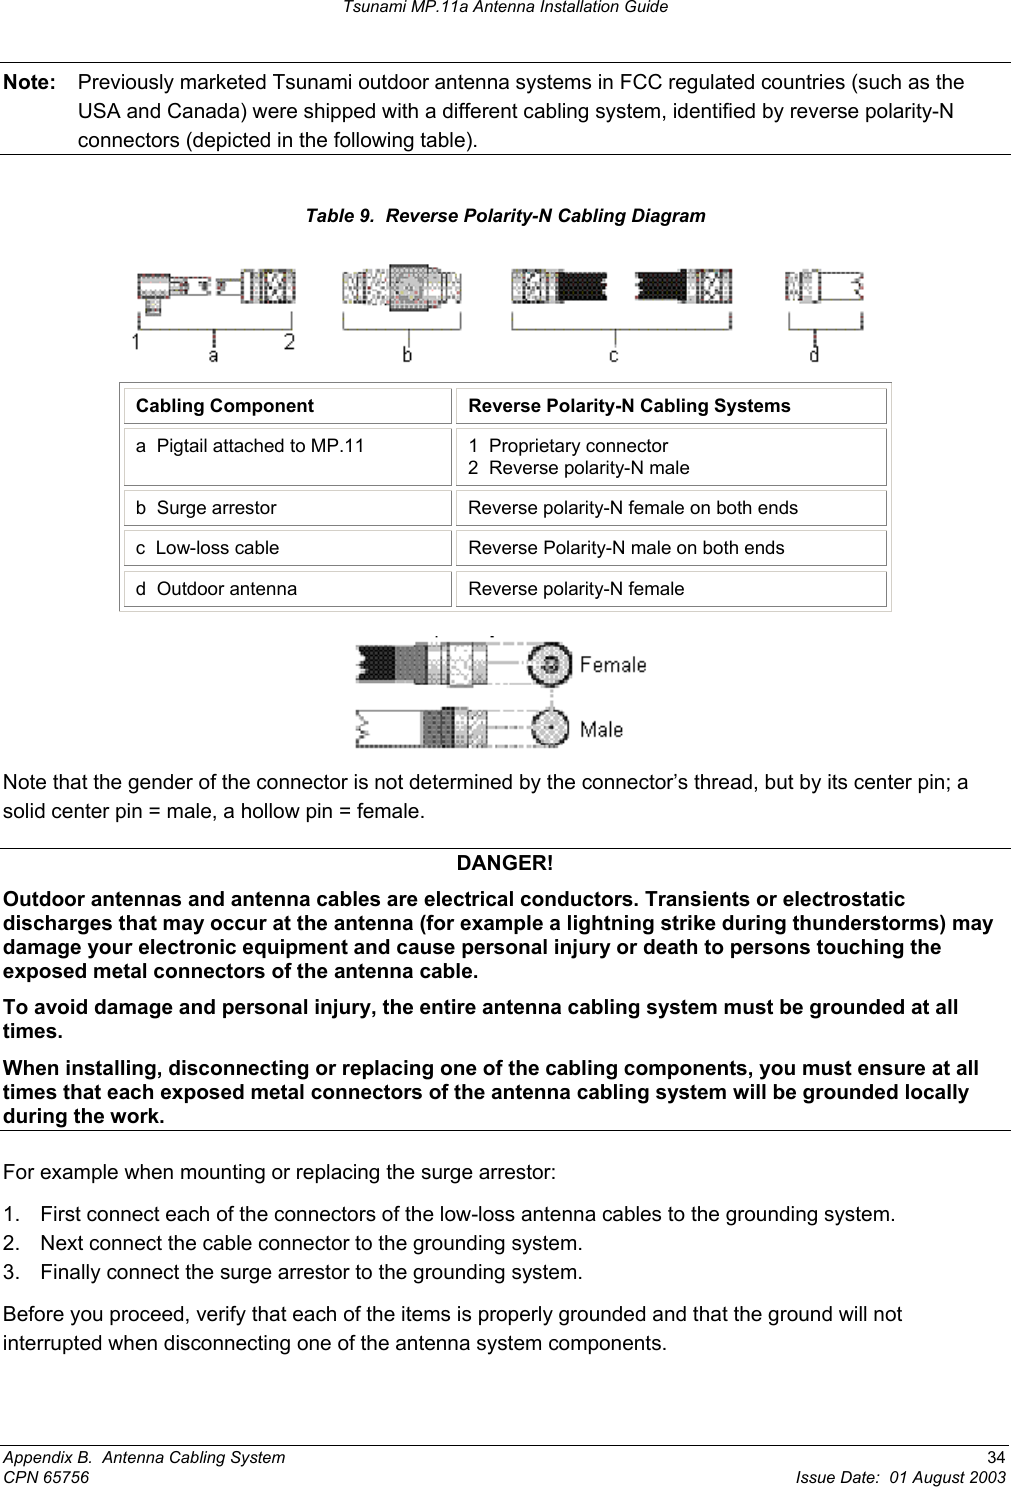 Tsunami MP.11a Antenna Installation Guide Note:  Previously marketed Tsunami outdoor antenna systems in FCC regulated countries (such as the USA and Canada) were shipped with a different cabling system, identified by reverse polarity-N connectors (depicted in the following table). Table 9.  Reverse Polarity-N Cabling Diagram  Cabling Component  Reverse Polarity-N Cabling Systems a  Pigtail attached to MP.11  1  Proprietary connector 2  Reverse polarity-N male b  Surge arrestor  Reverse polarity-N female on both ends c  Low-loss cable  Reverse Polarity-N male on both ends d  Outdoor antenna  Reverse polarity-N female  Note that the gender of the connector is not determined by the connector’s thread, but by its center pin; a solid center pin = male, a hollow pin = female. DANGER! Outdoor antennas and antenna cables are electrical conductors. Transients or electrostatic discharges that may occur at the antenna (for example a lightning strike during thunderstorms) may damage your electronic equipment and cause personal injury or death to persons touching the exposed metal connectors of the antenna cable. To avoid damage and personal injury, the entire antenna cabling system must be grounded at all times. When installing, disconnecting or replacing one of the cabling components, you must ensure at all times that each exposed metal connectors of the antenna cabling system will be grounded locally during the work. For example when mounting or replacing the surge arrestor: 1.  First connect each of the connectors of the low-loss antenna cables to the grounding system. 2.  Next connect the cable connector to the grounding system. 3.  Finally connect the surge arrestor to the grounding system. Before you proceed, verify that each of the items is properly grounded and that the ground will not interrupted when disconnecting one of the antenna system components. Appendix B.  Antenna Cabling System  34 CPN 65756  Issue Date:  01 August 2003 